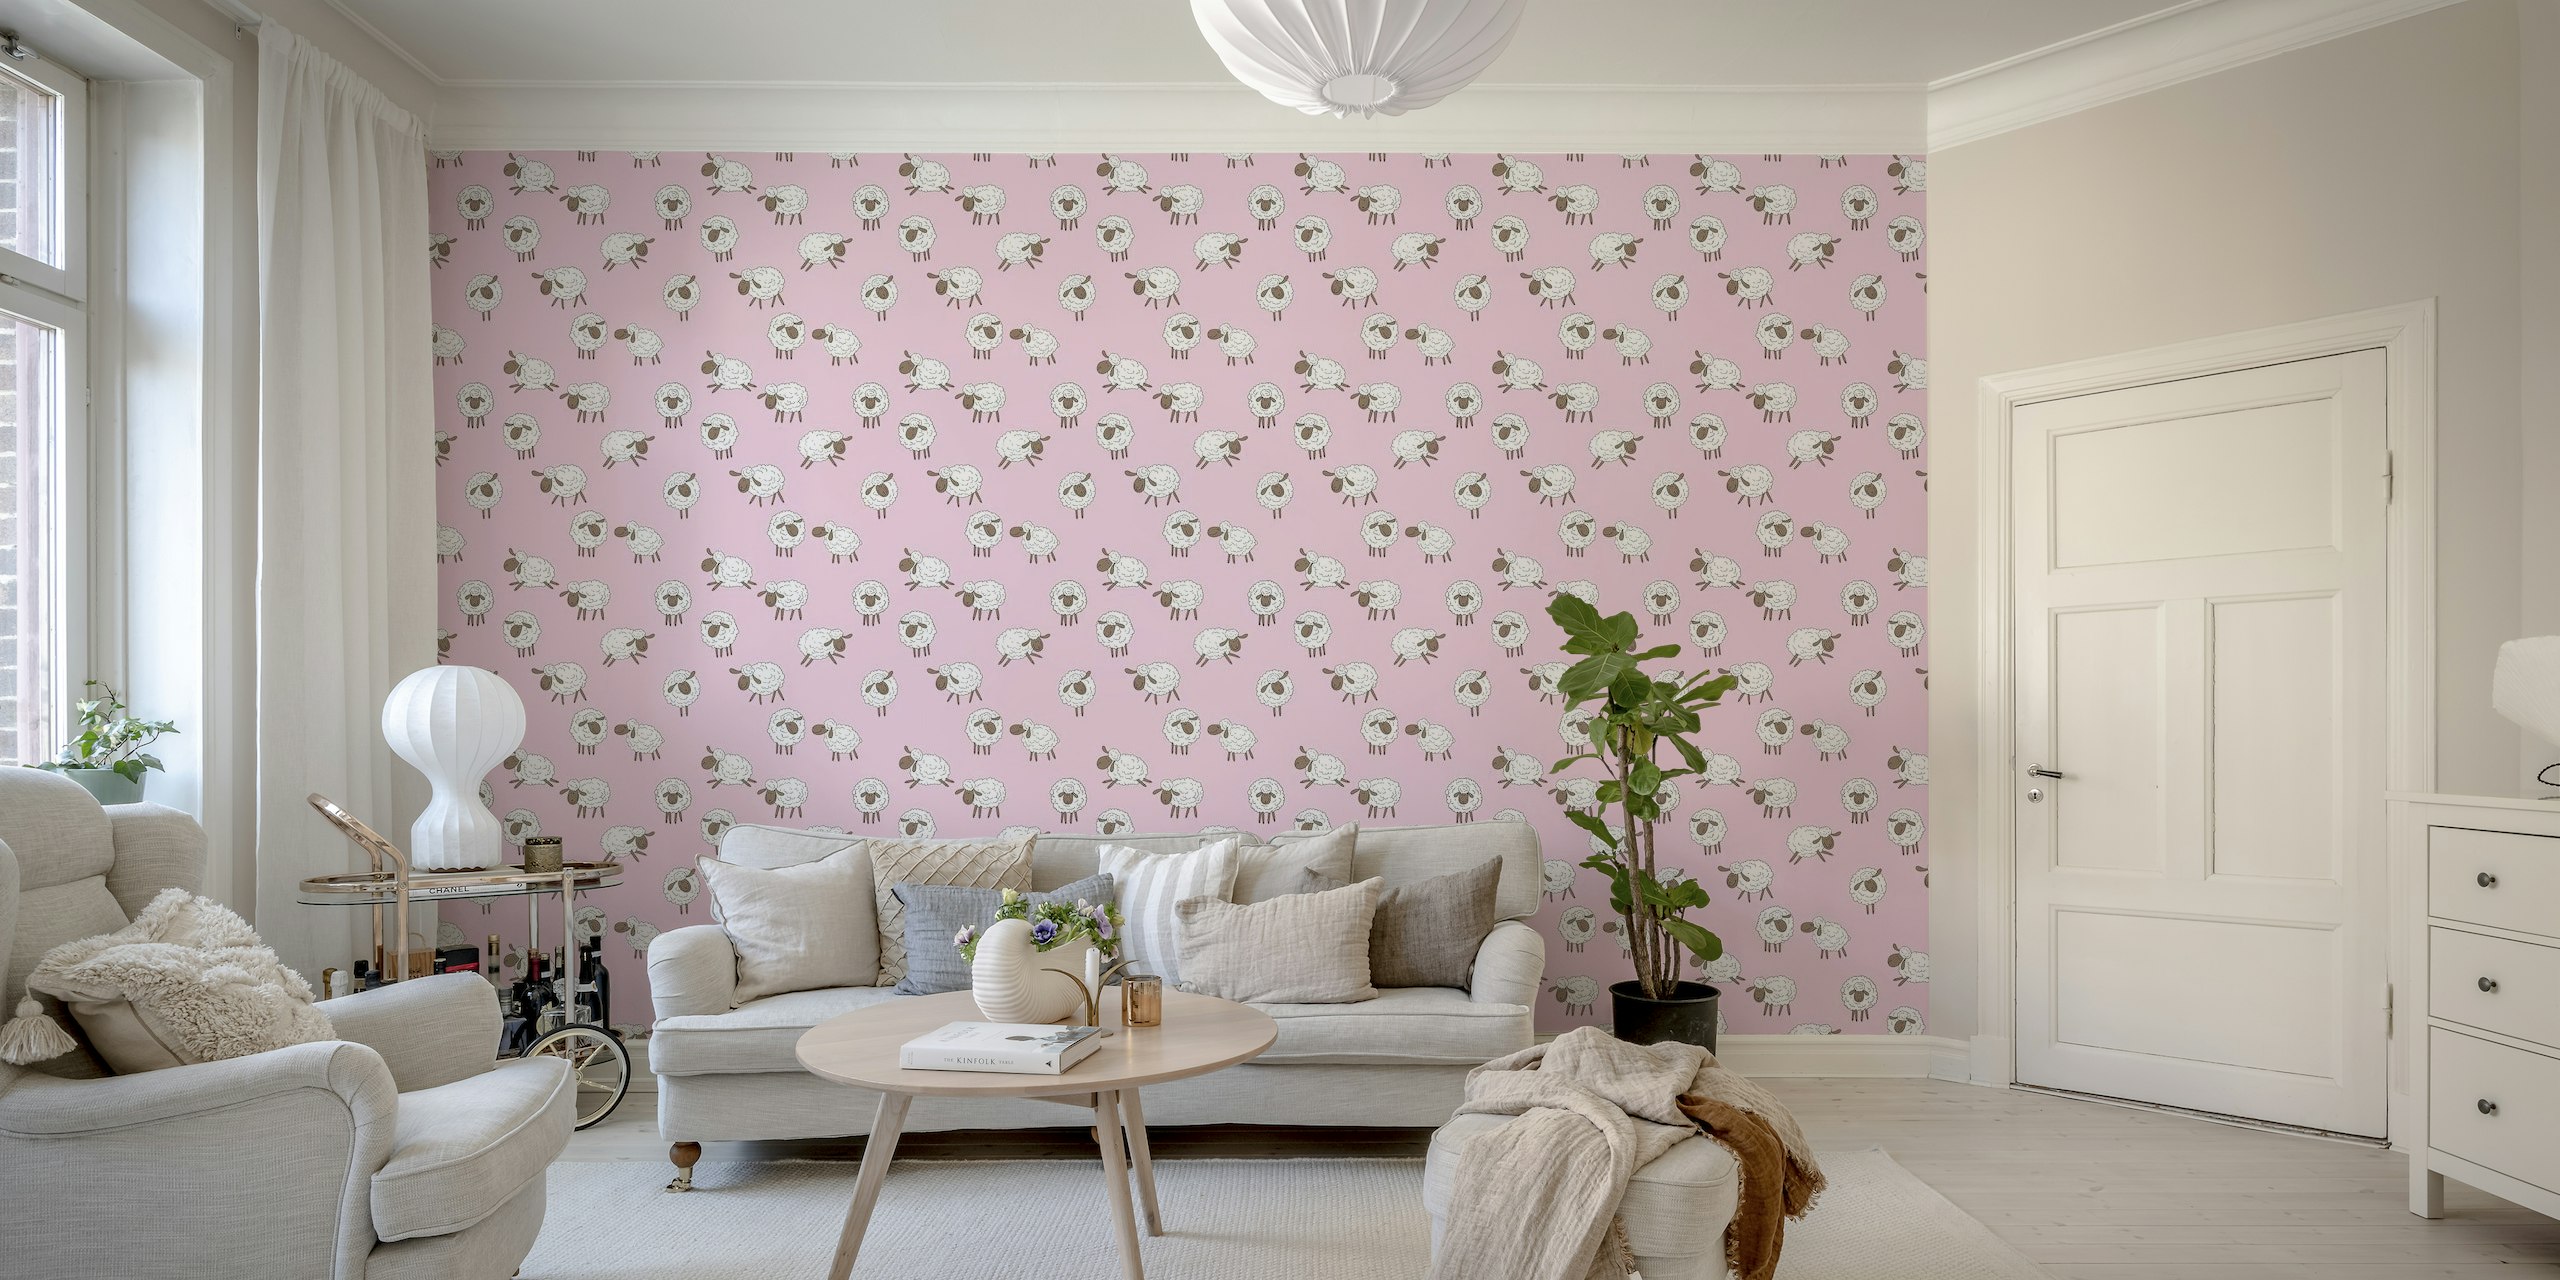 Counting sheep on baby pink wallpaper